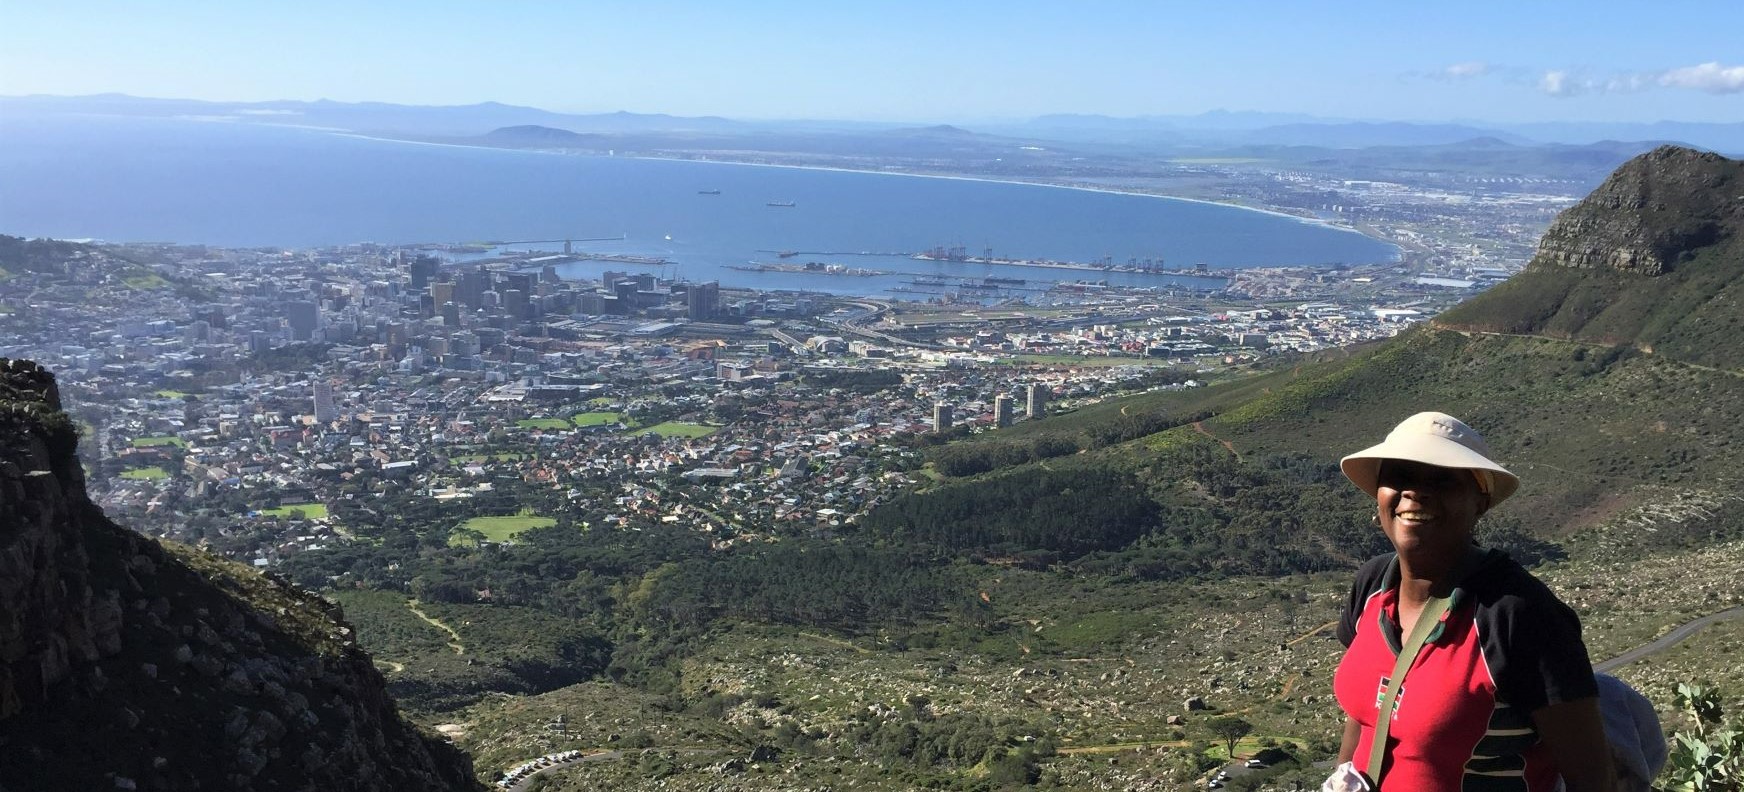 View of the City of Cape Town from Block Mountain